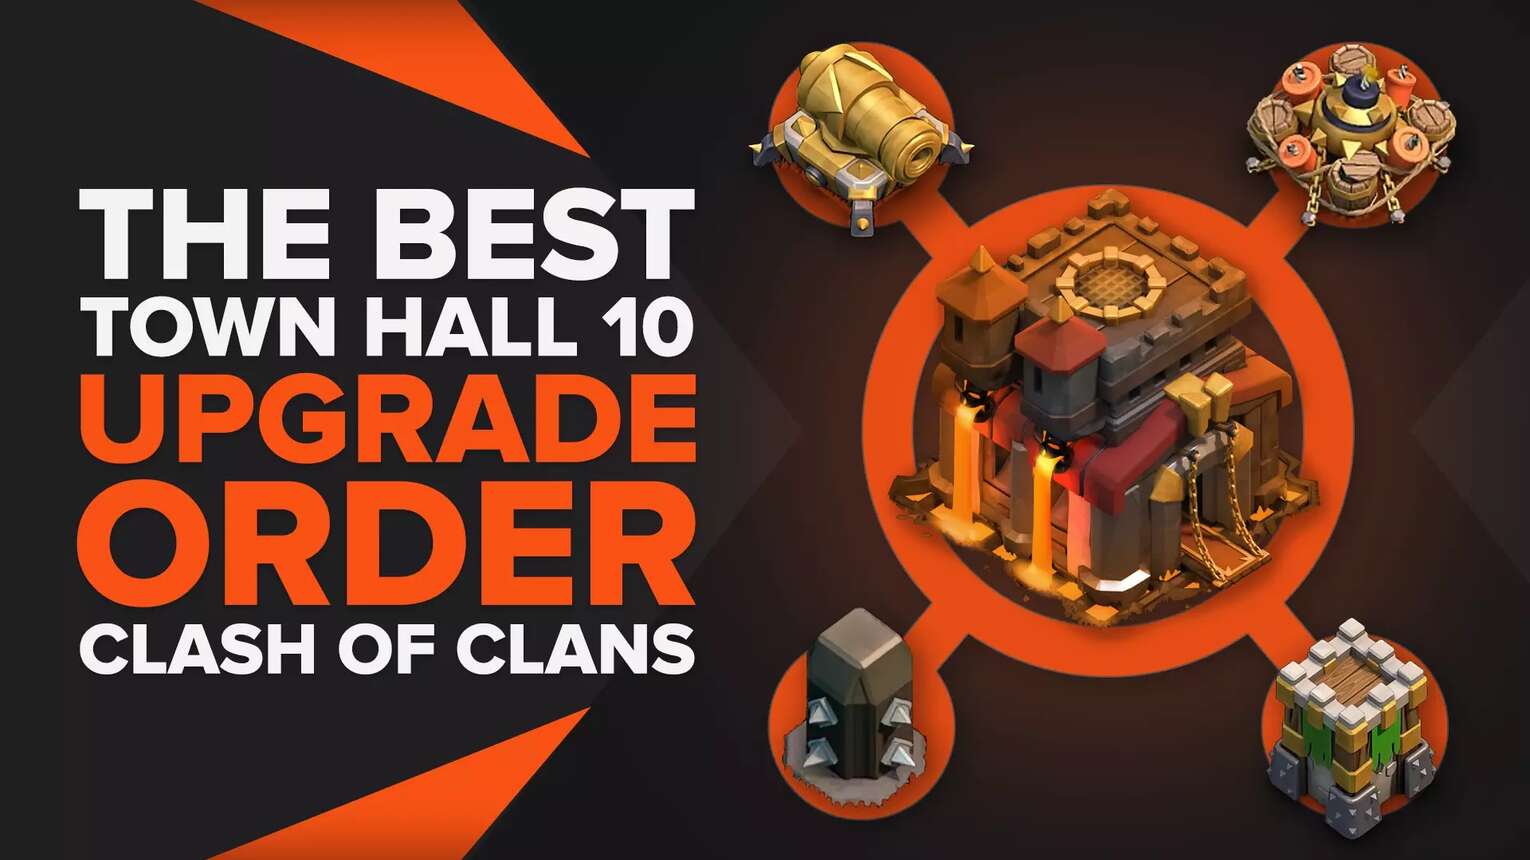 See The Best Town Hall 10 Upgrade Order In Clash Of Clans!